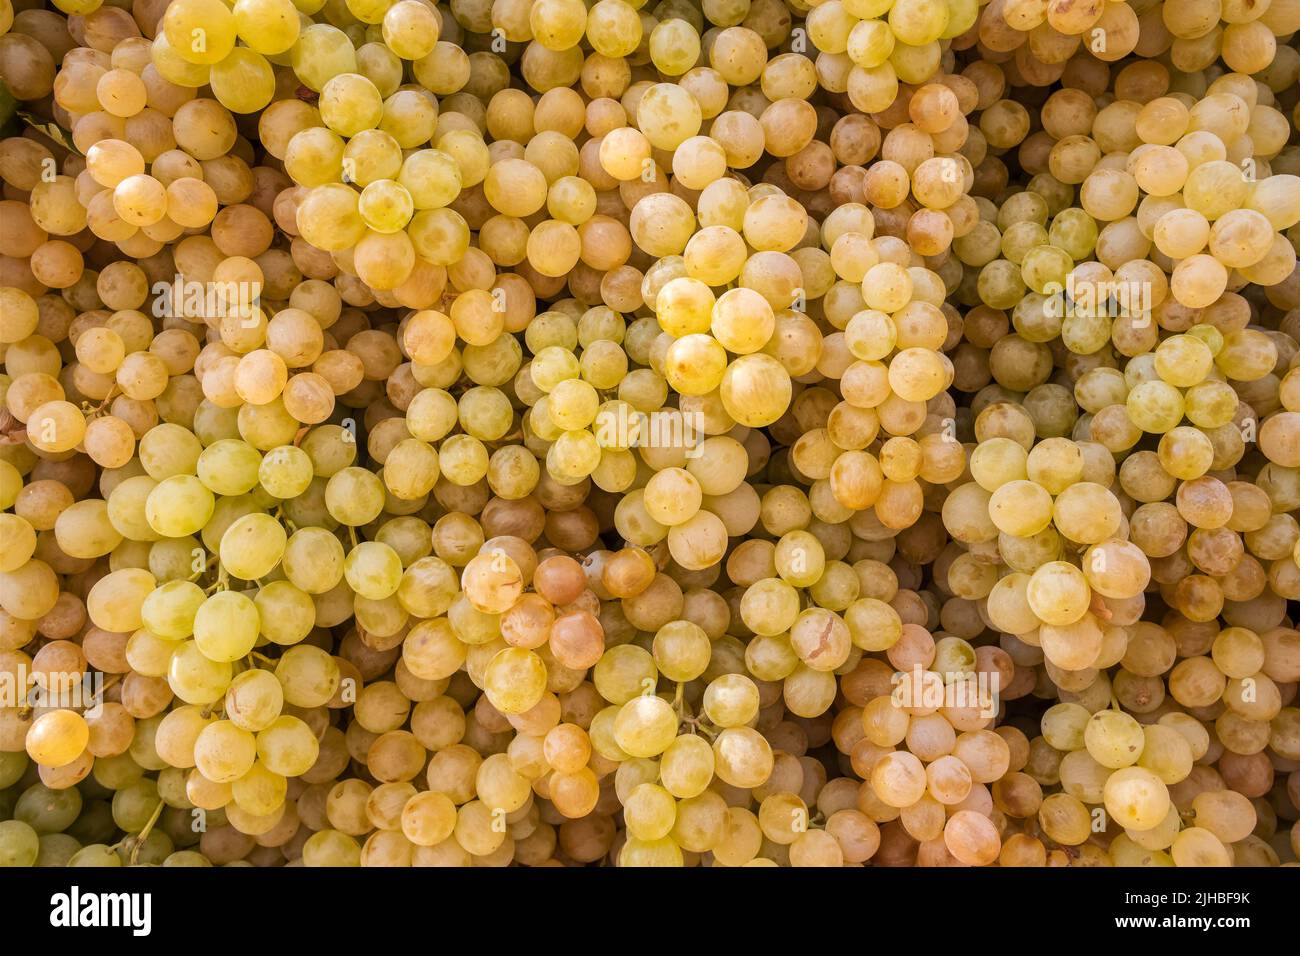 Ripe yallow grapes on the fruit market close-up Stock Photo